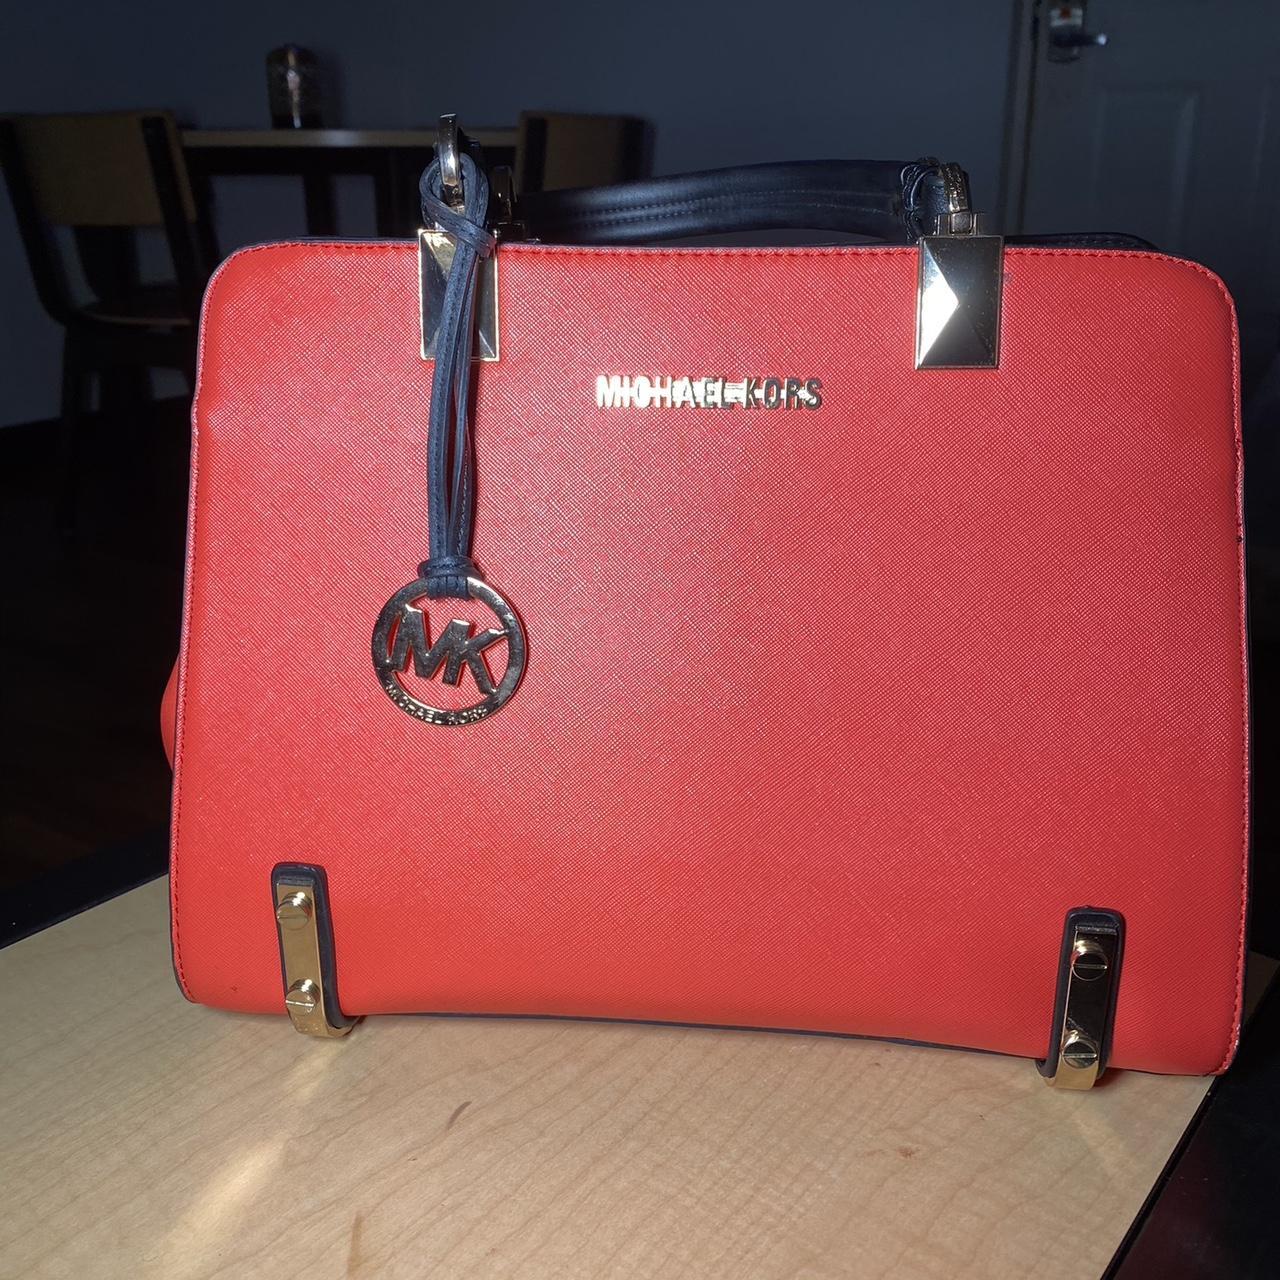 small red and white michael kors bag. undure if made - Depop